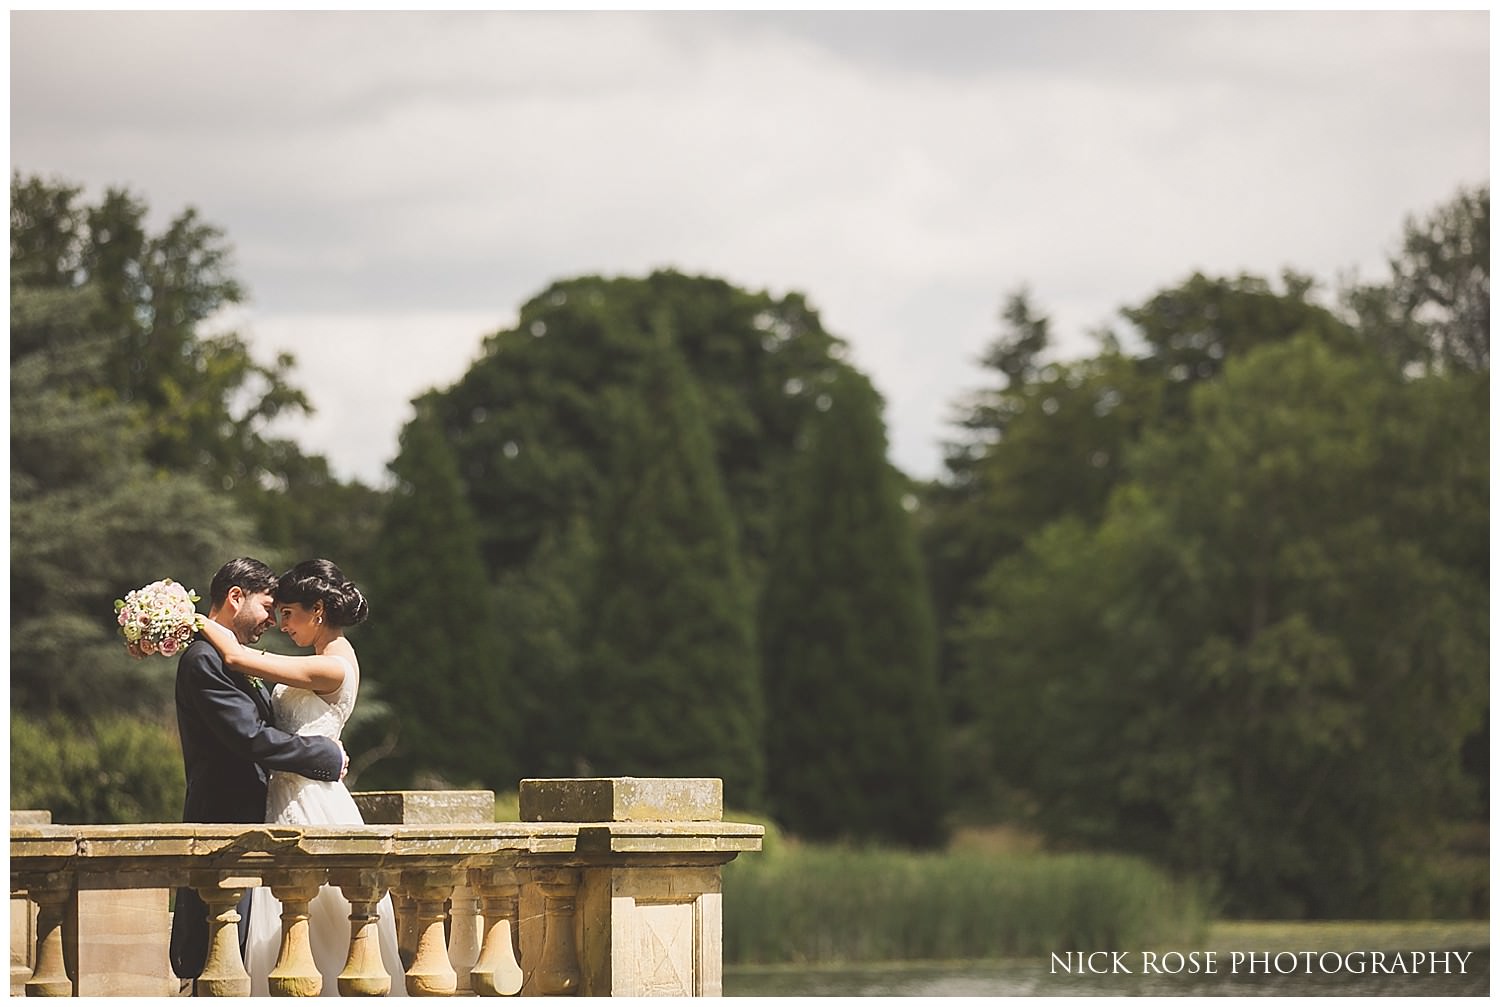  Wedding portrait photograph at the lake in Hever Castle Kent 